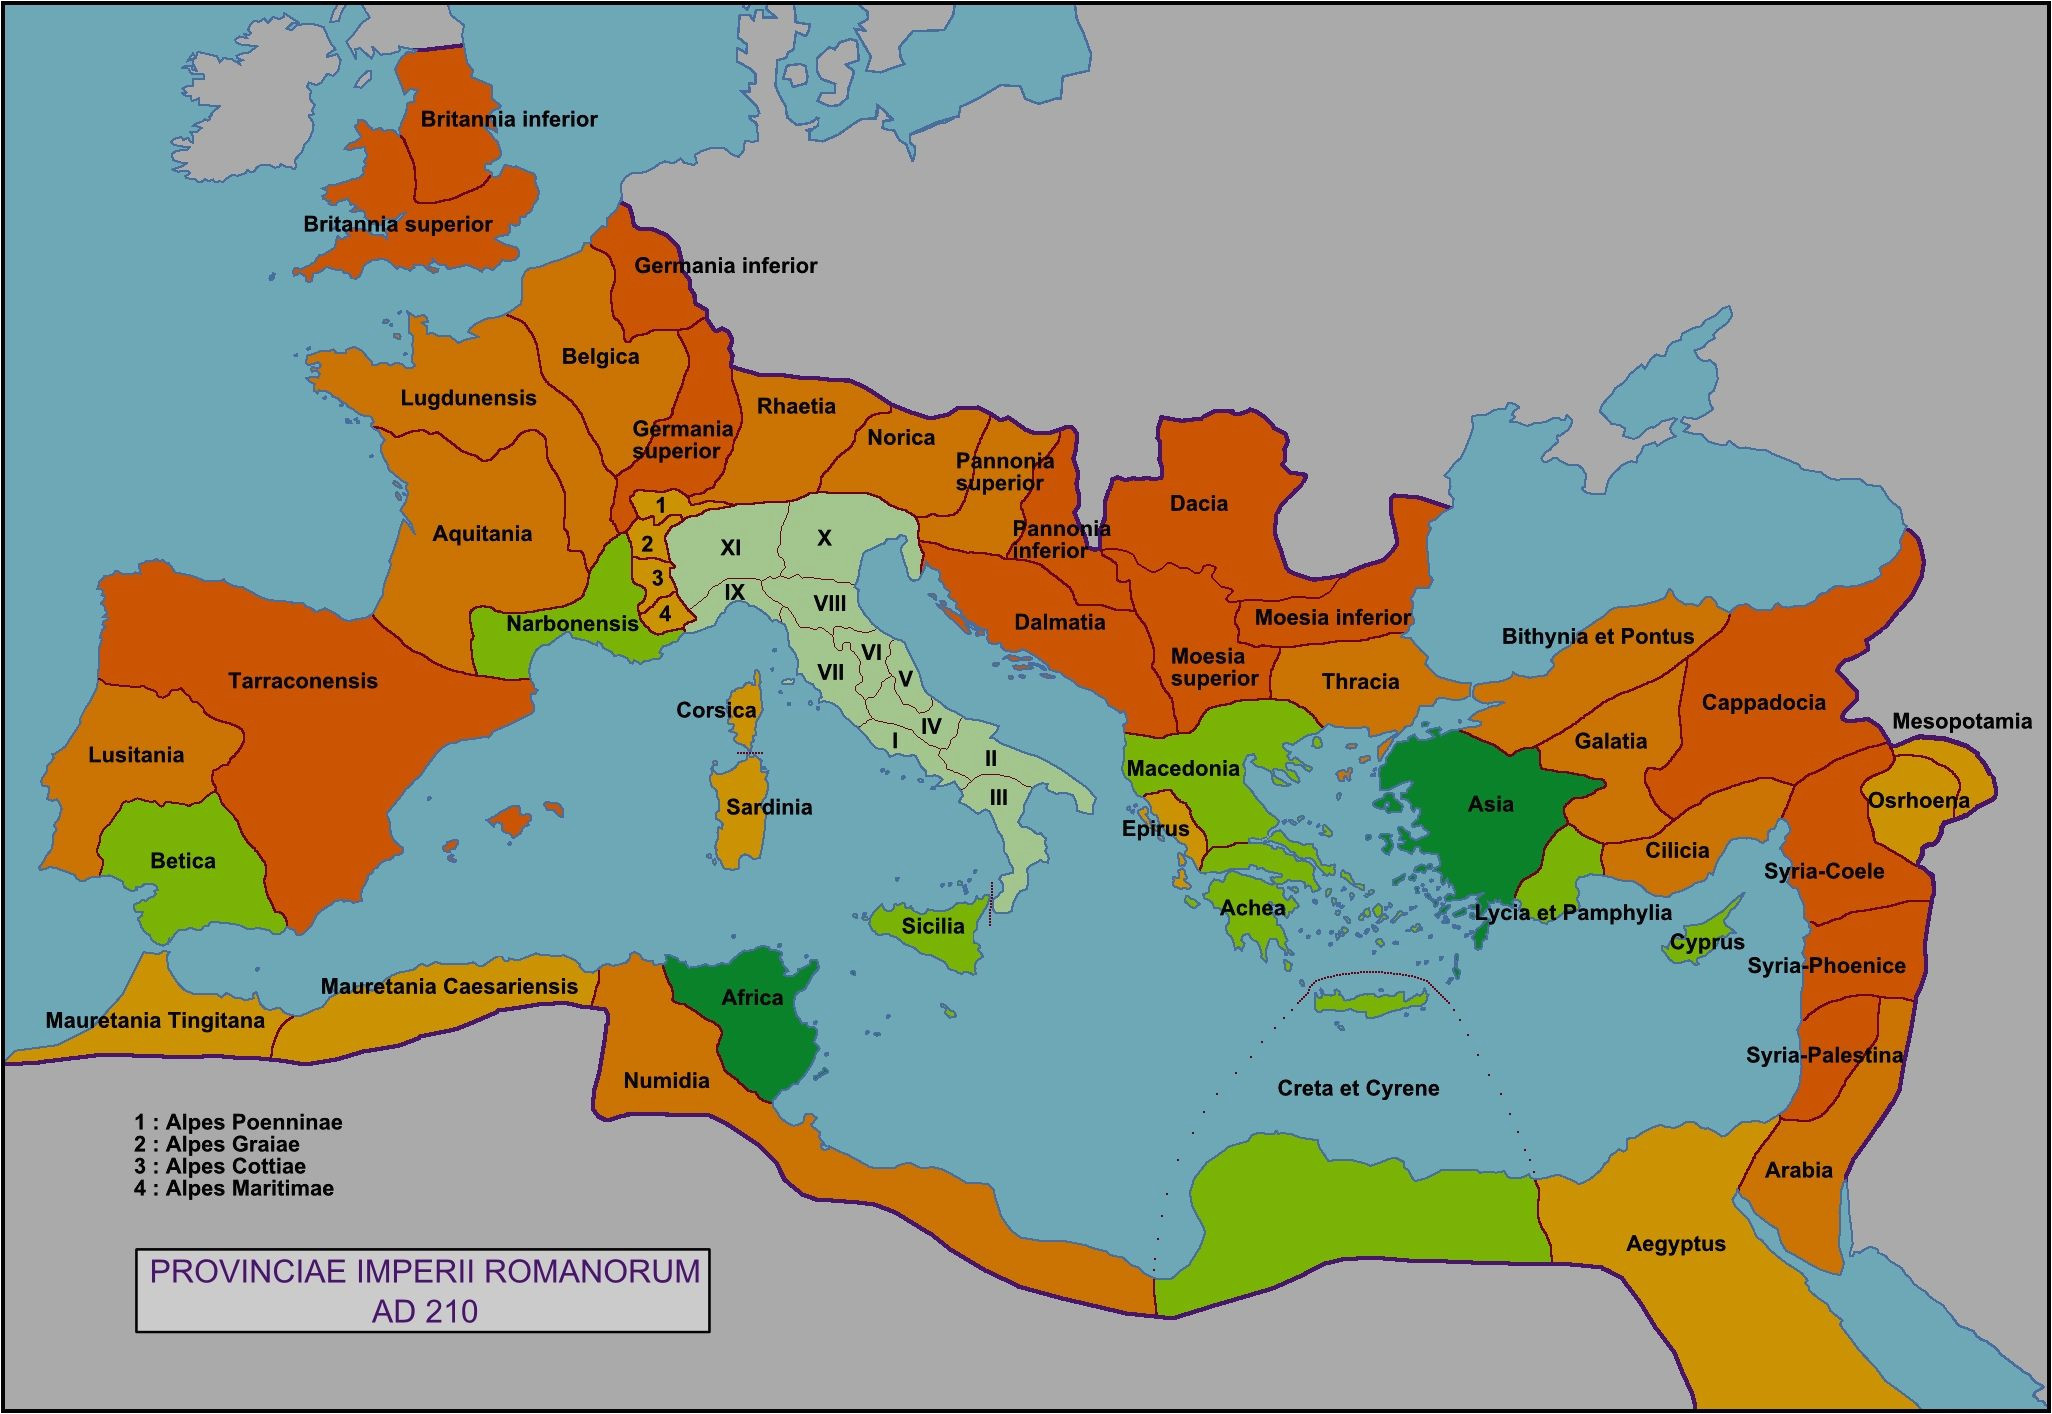 Map Of Italy In Roman Times Pin By Belgium On Belgica Travel Roman Empire Map Roman Empire Of Map Of Italy In Roman Times 